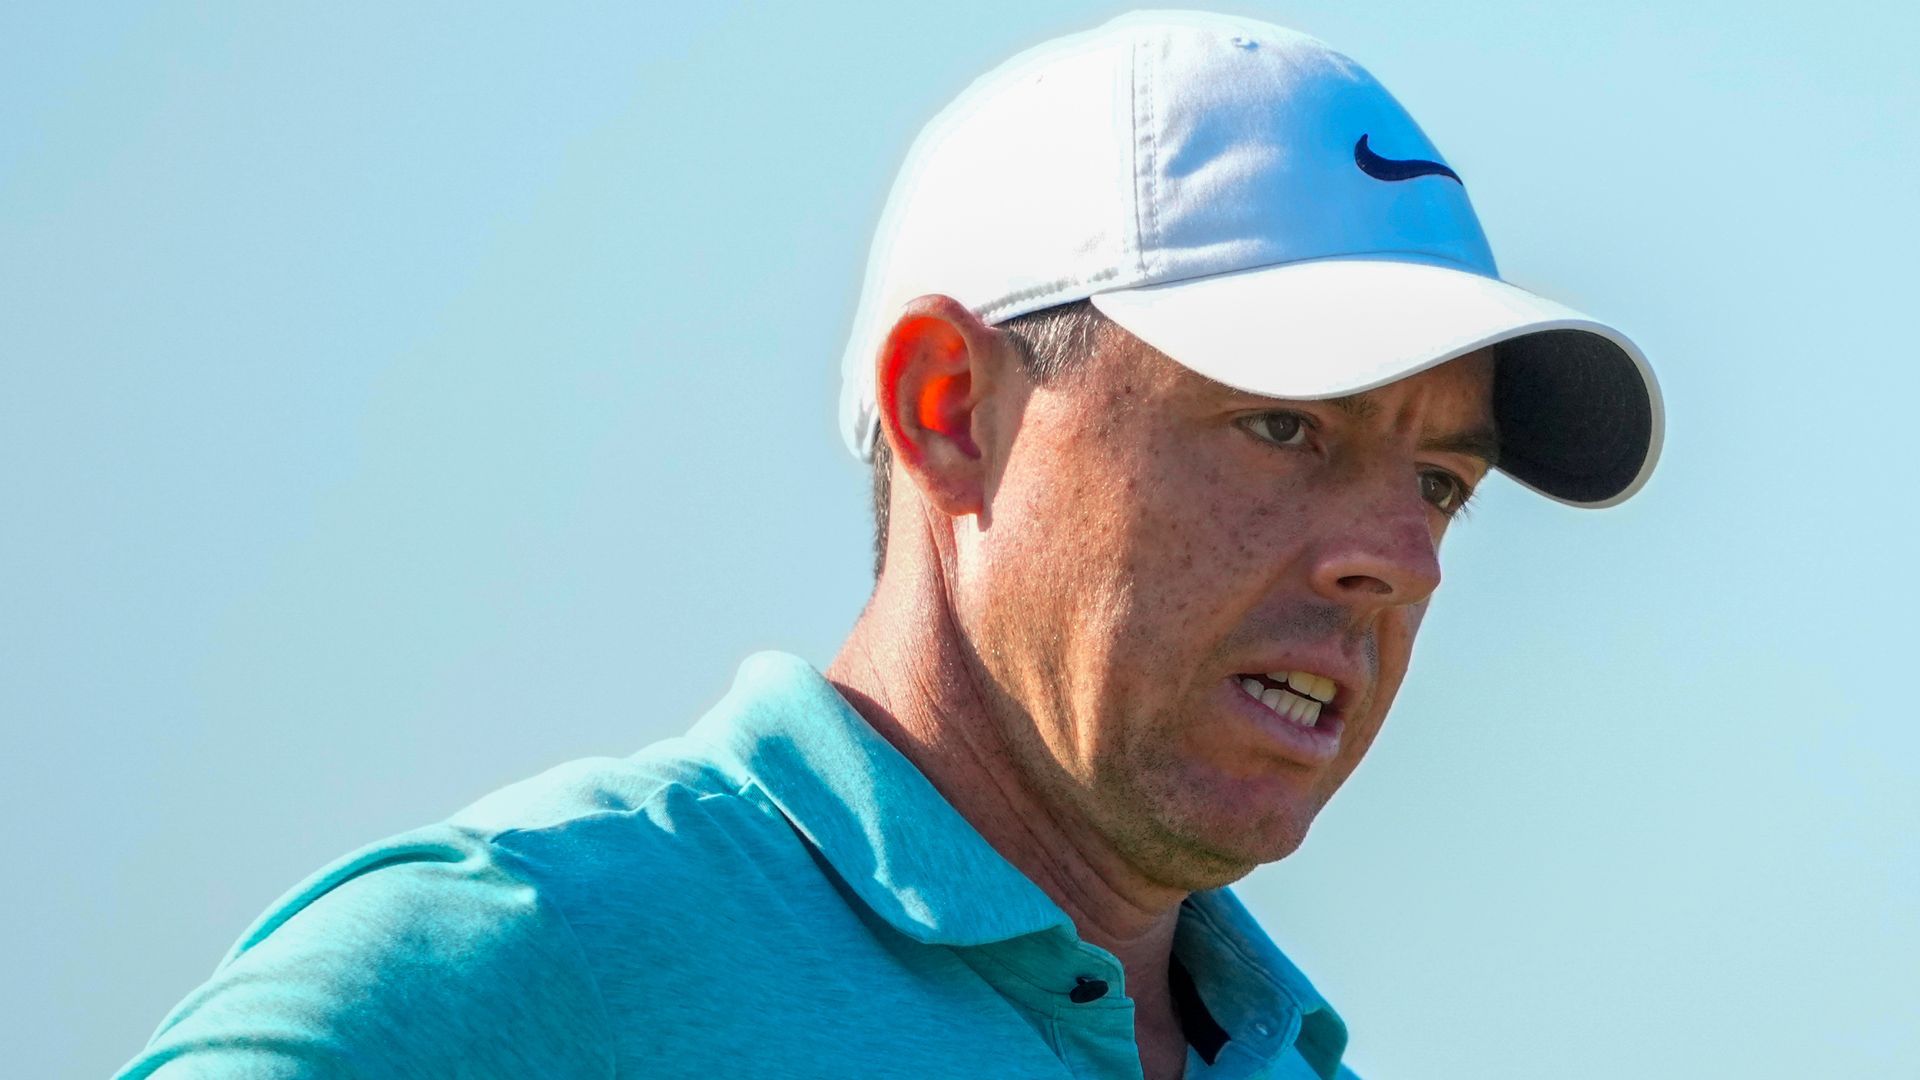 McIlroy ready to suffer '100 Sundays' in pursuit of 'sweet' fifth major